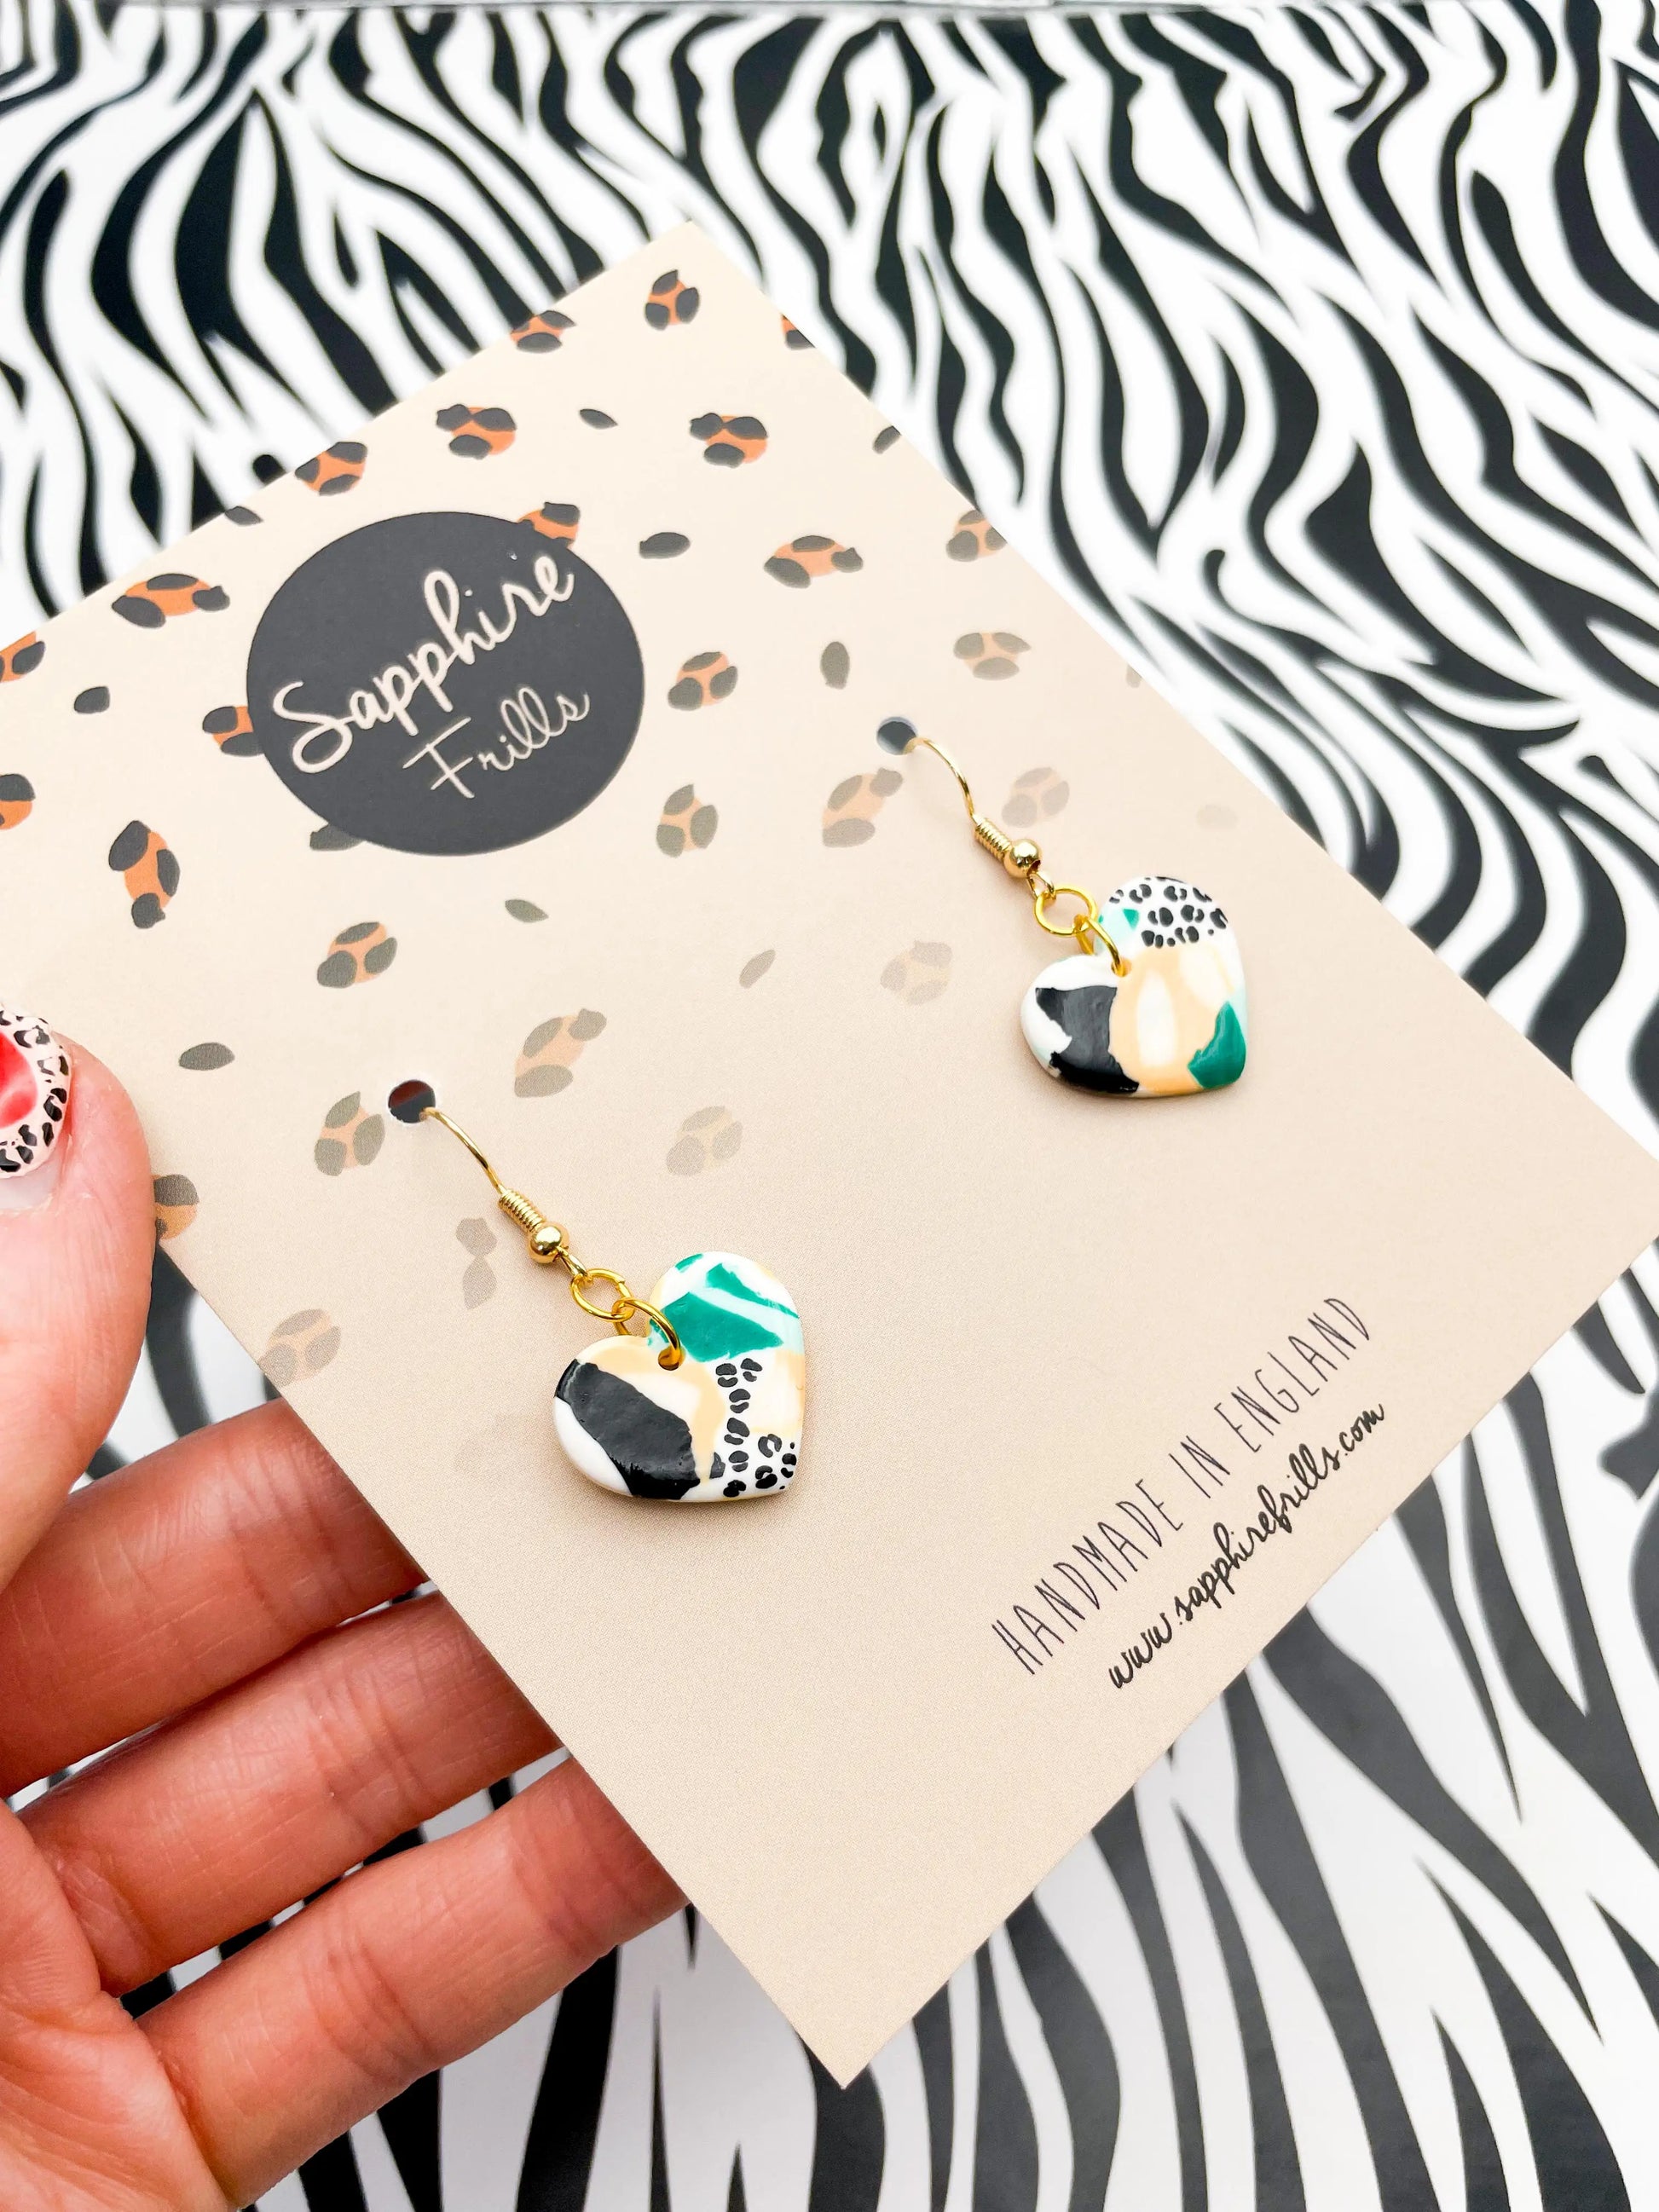 Medium Mint and Peach Abstract Jungle Leopard Print Heart Stud Earrings from Sapphire Frills